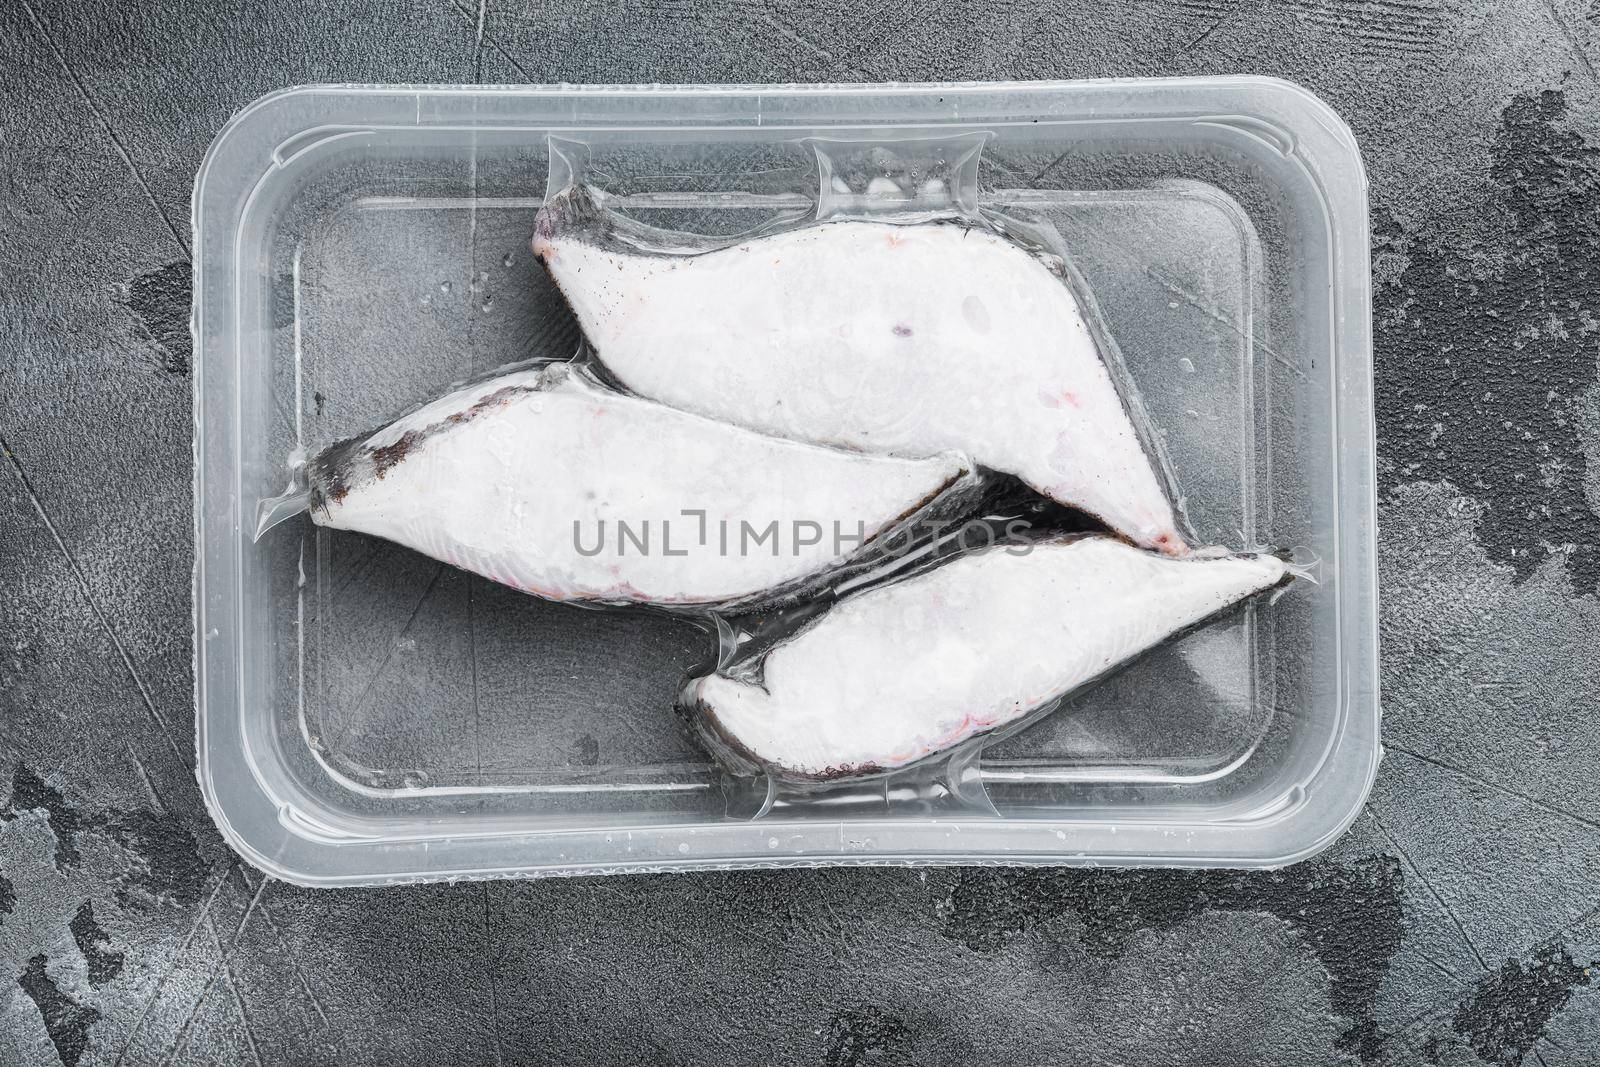 Halibut fish frozen steak pack set, on gray stone table background, top view flat lay